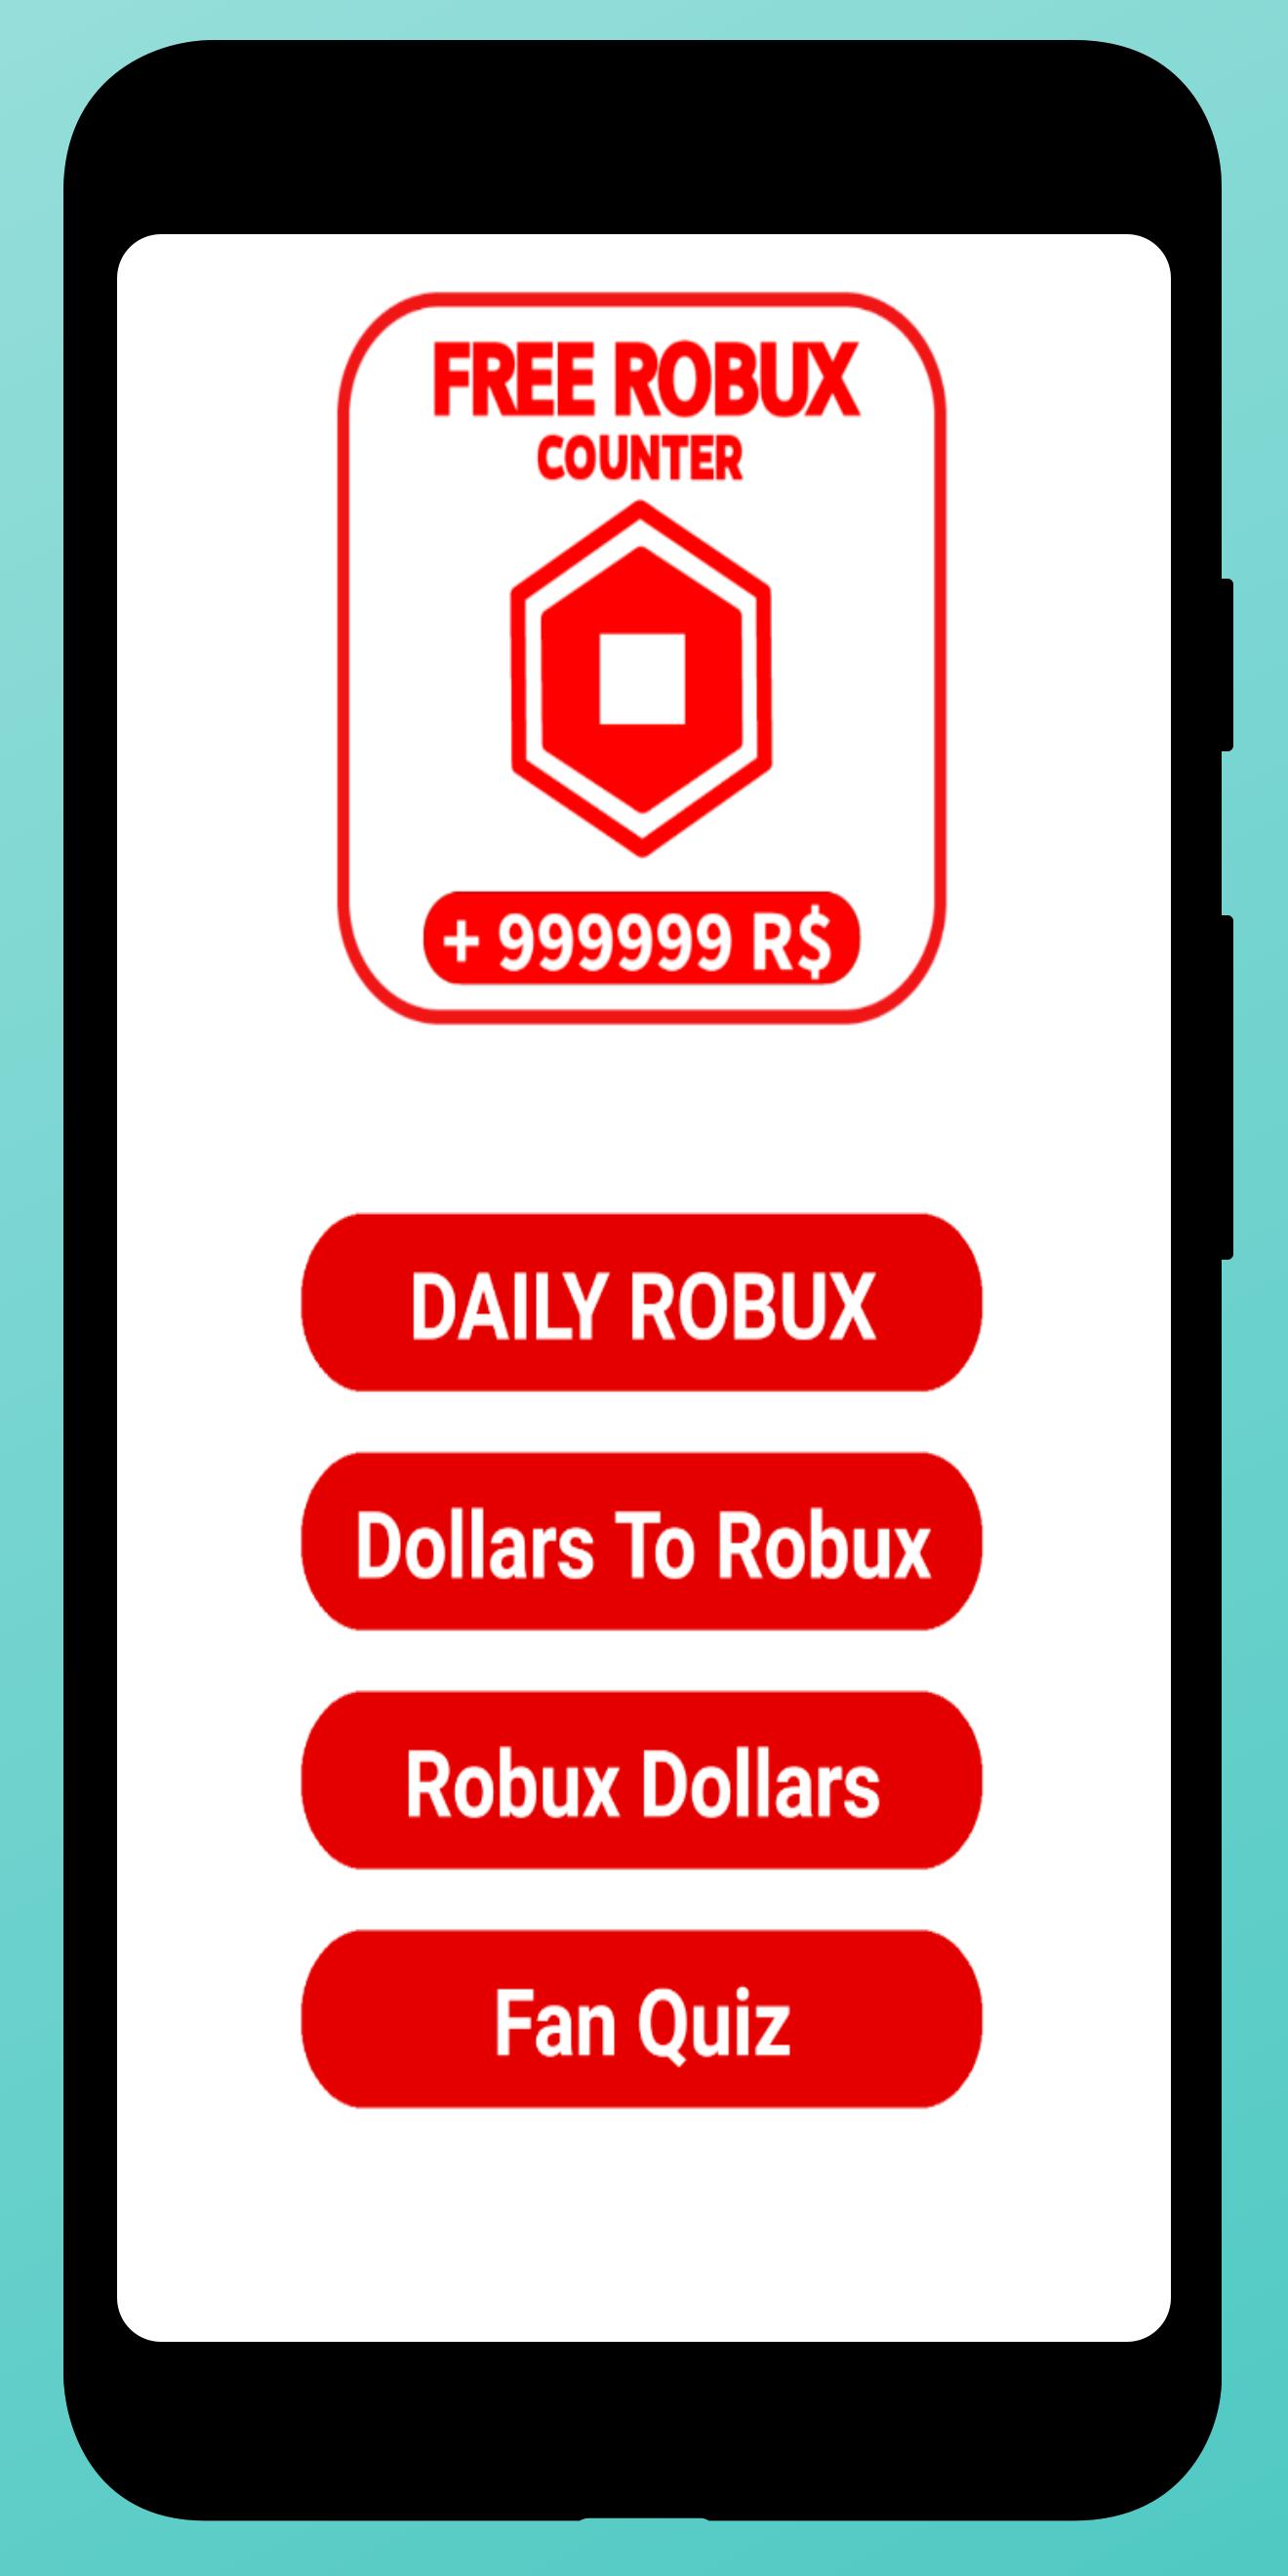 How To Get Free Robux Rbx Calc Free For Android Apk Download - free daily robux rbx calculator for android apk download